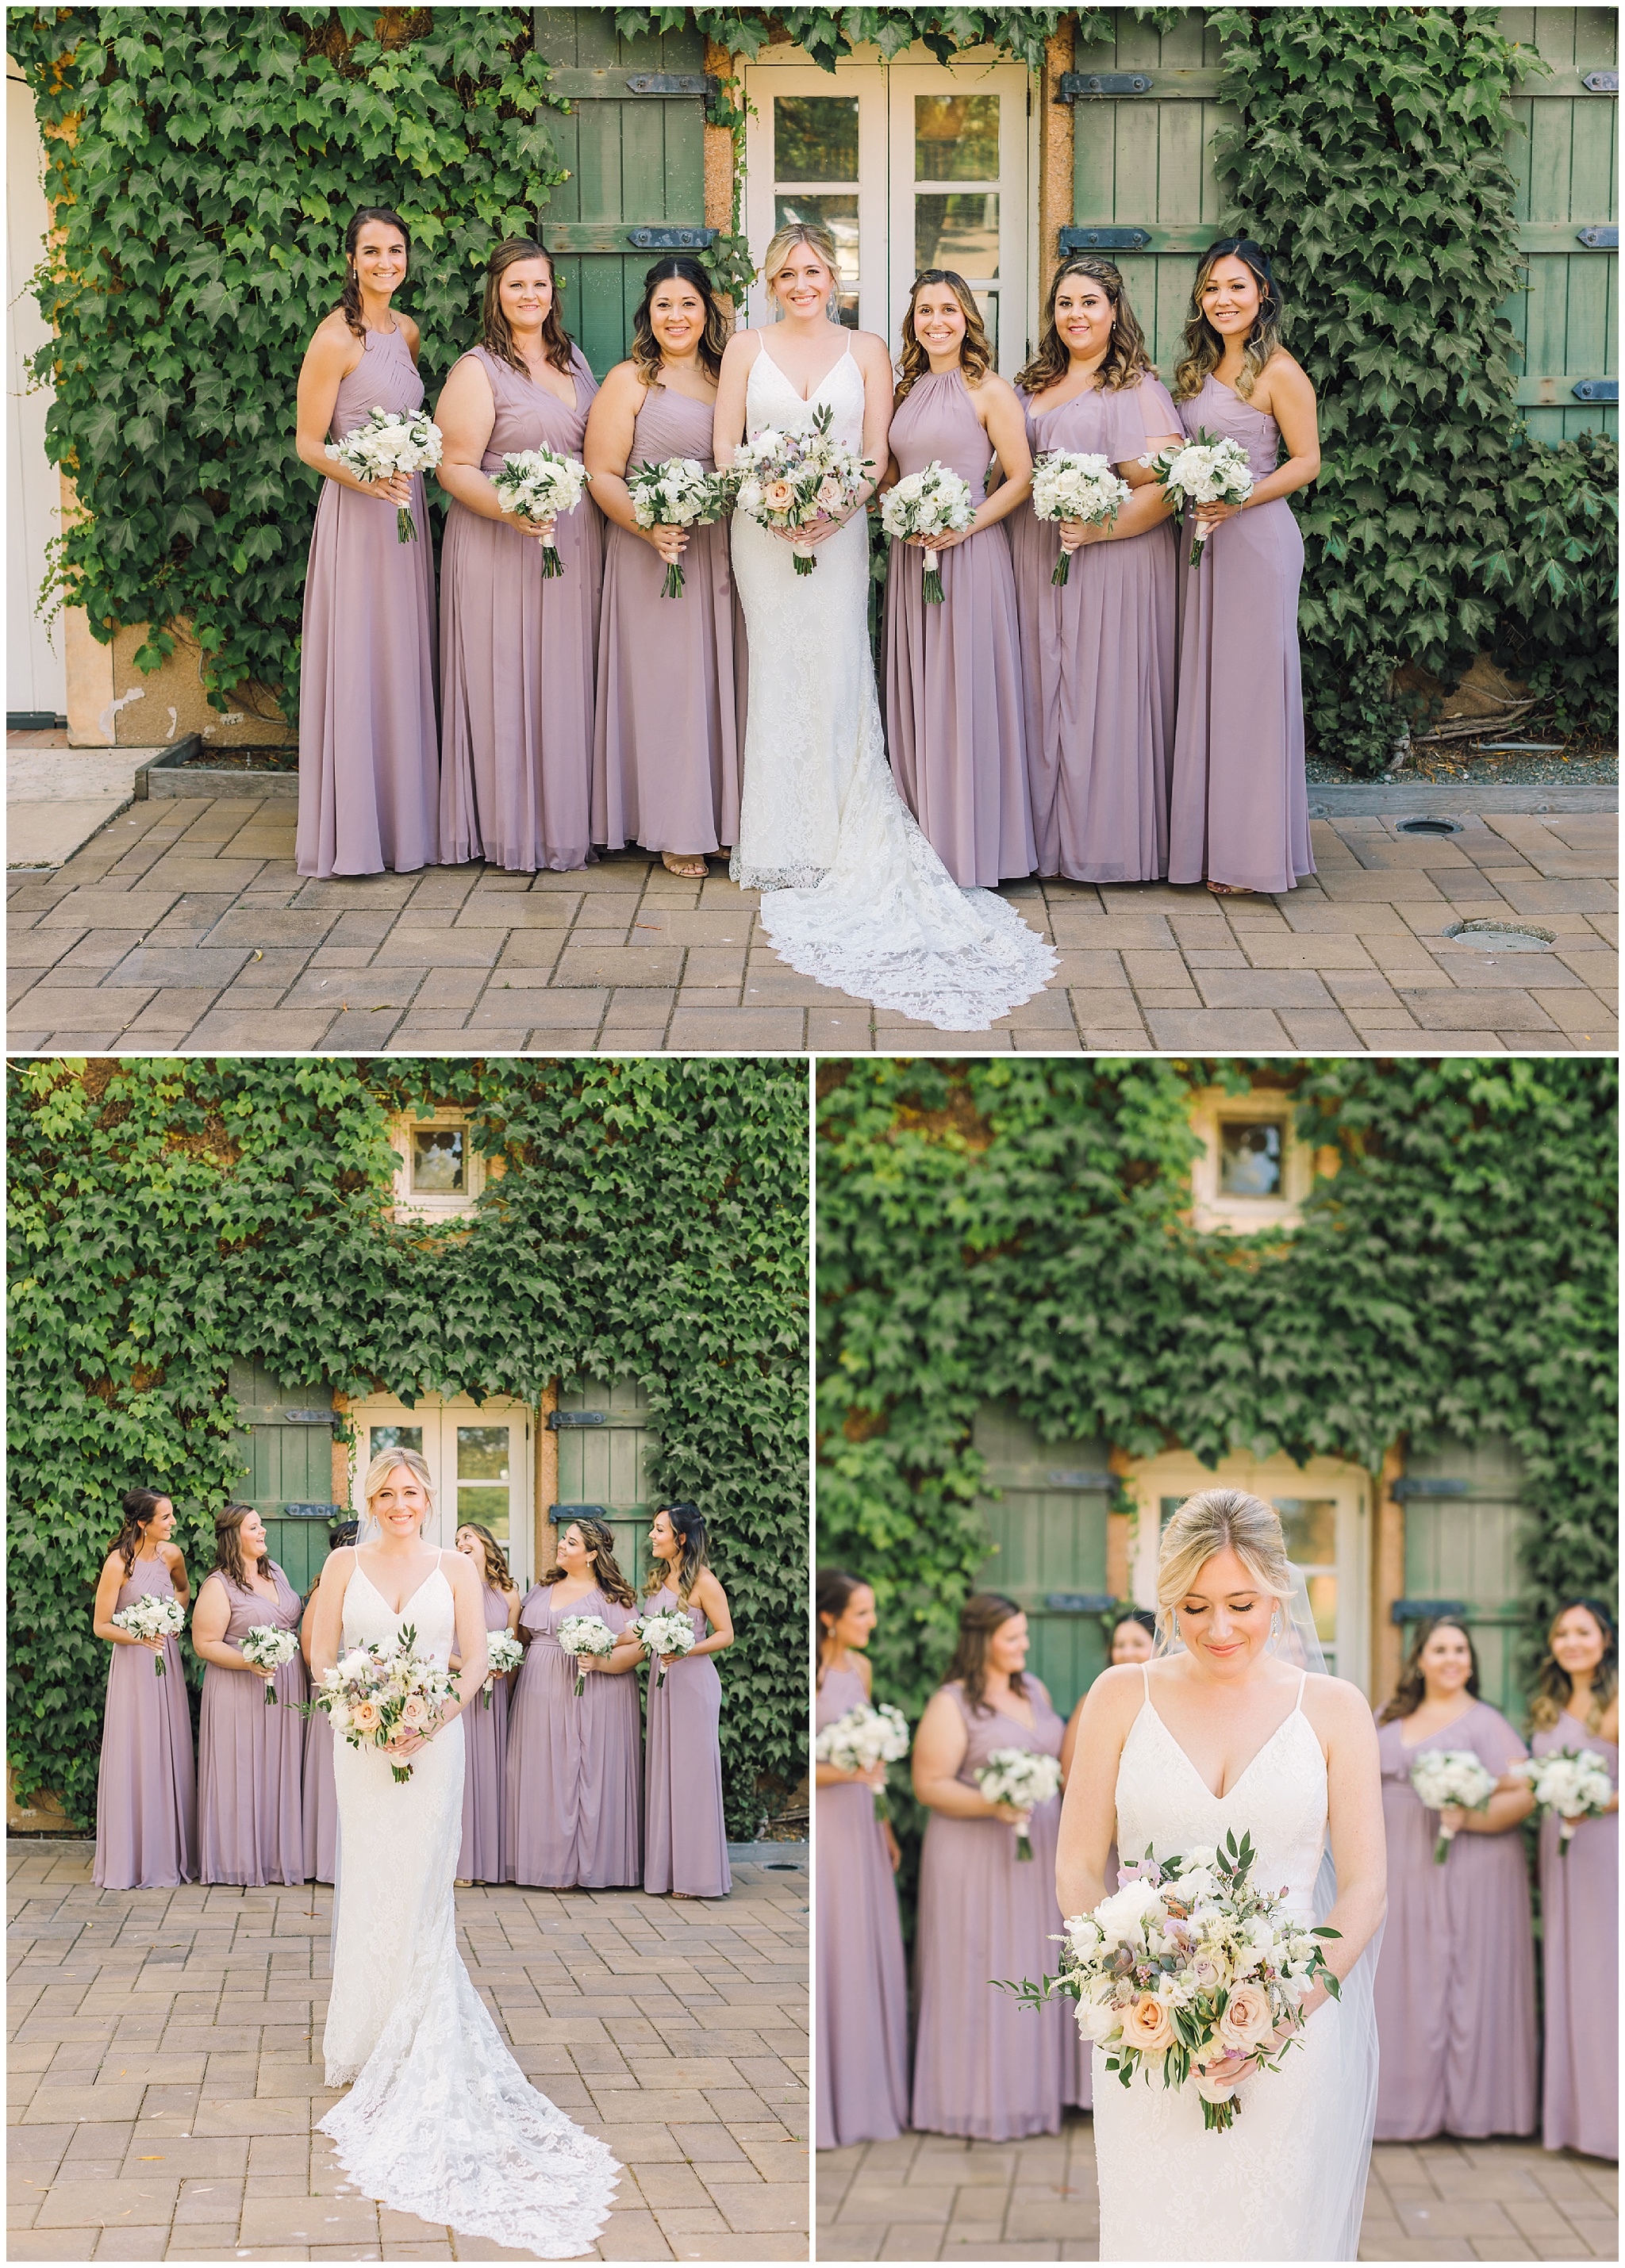 Viansa Winery Sonoma, Viansa Winery Wedding, courtney stockton photography, ybarra events, the girl and the fig catering, vanda floral design 